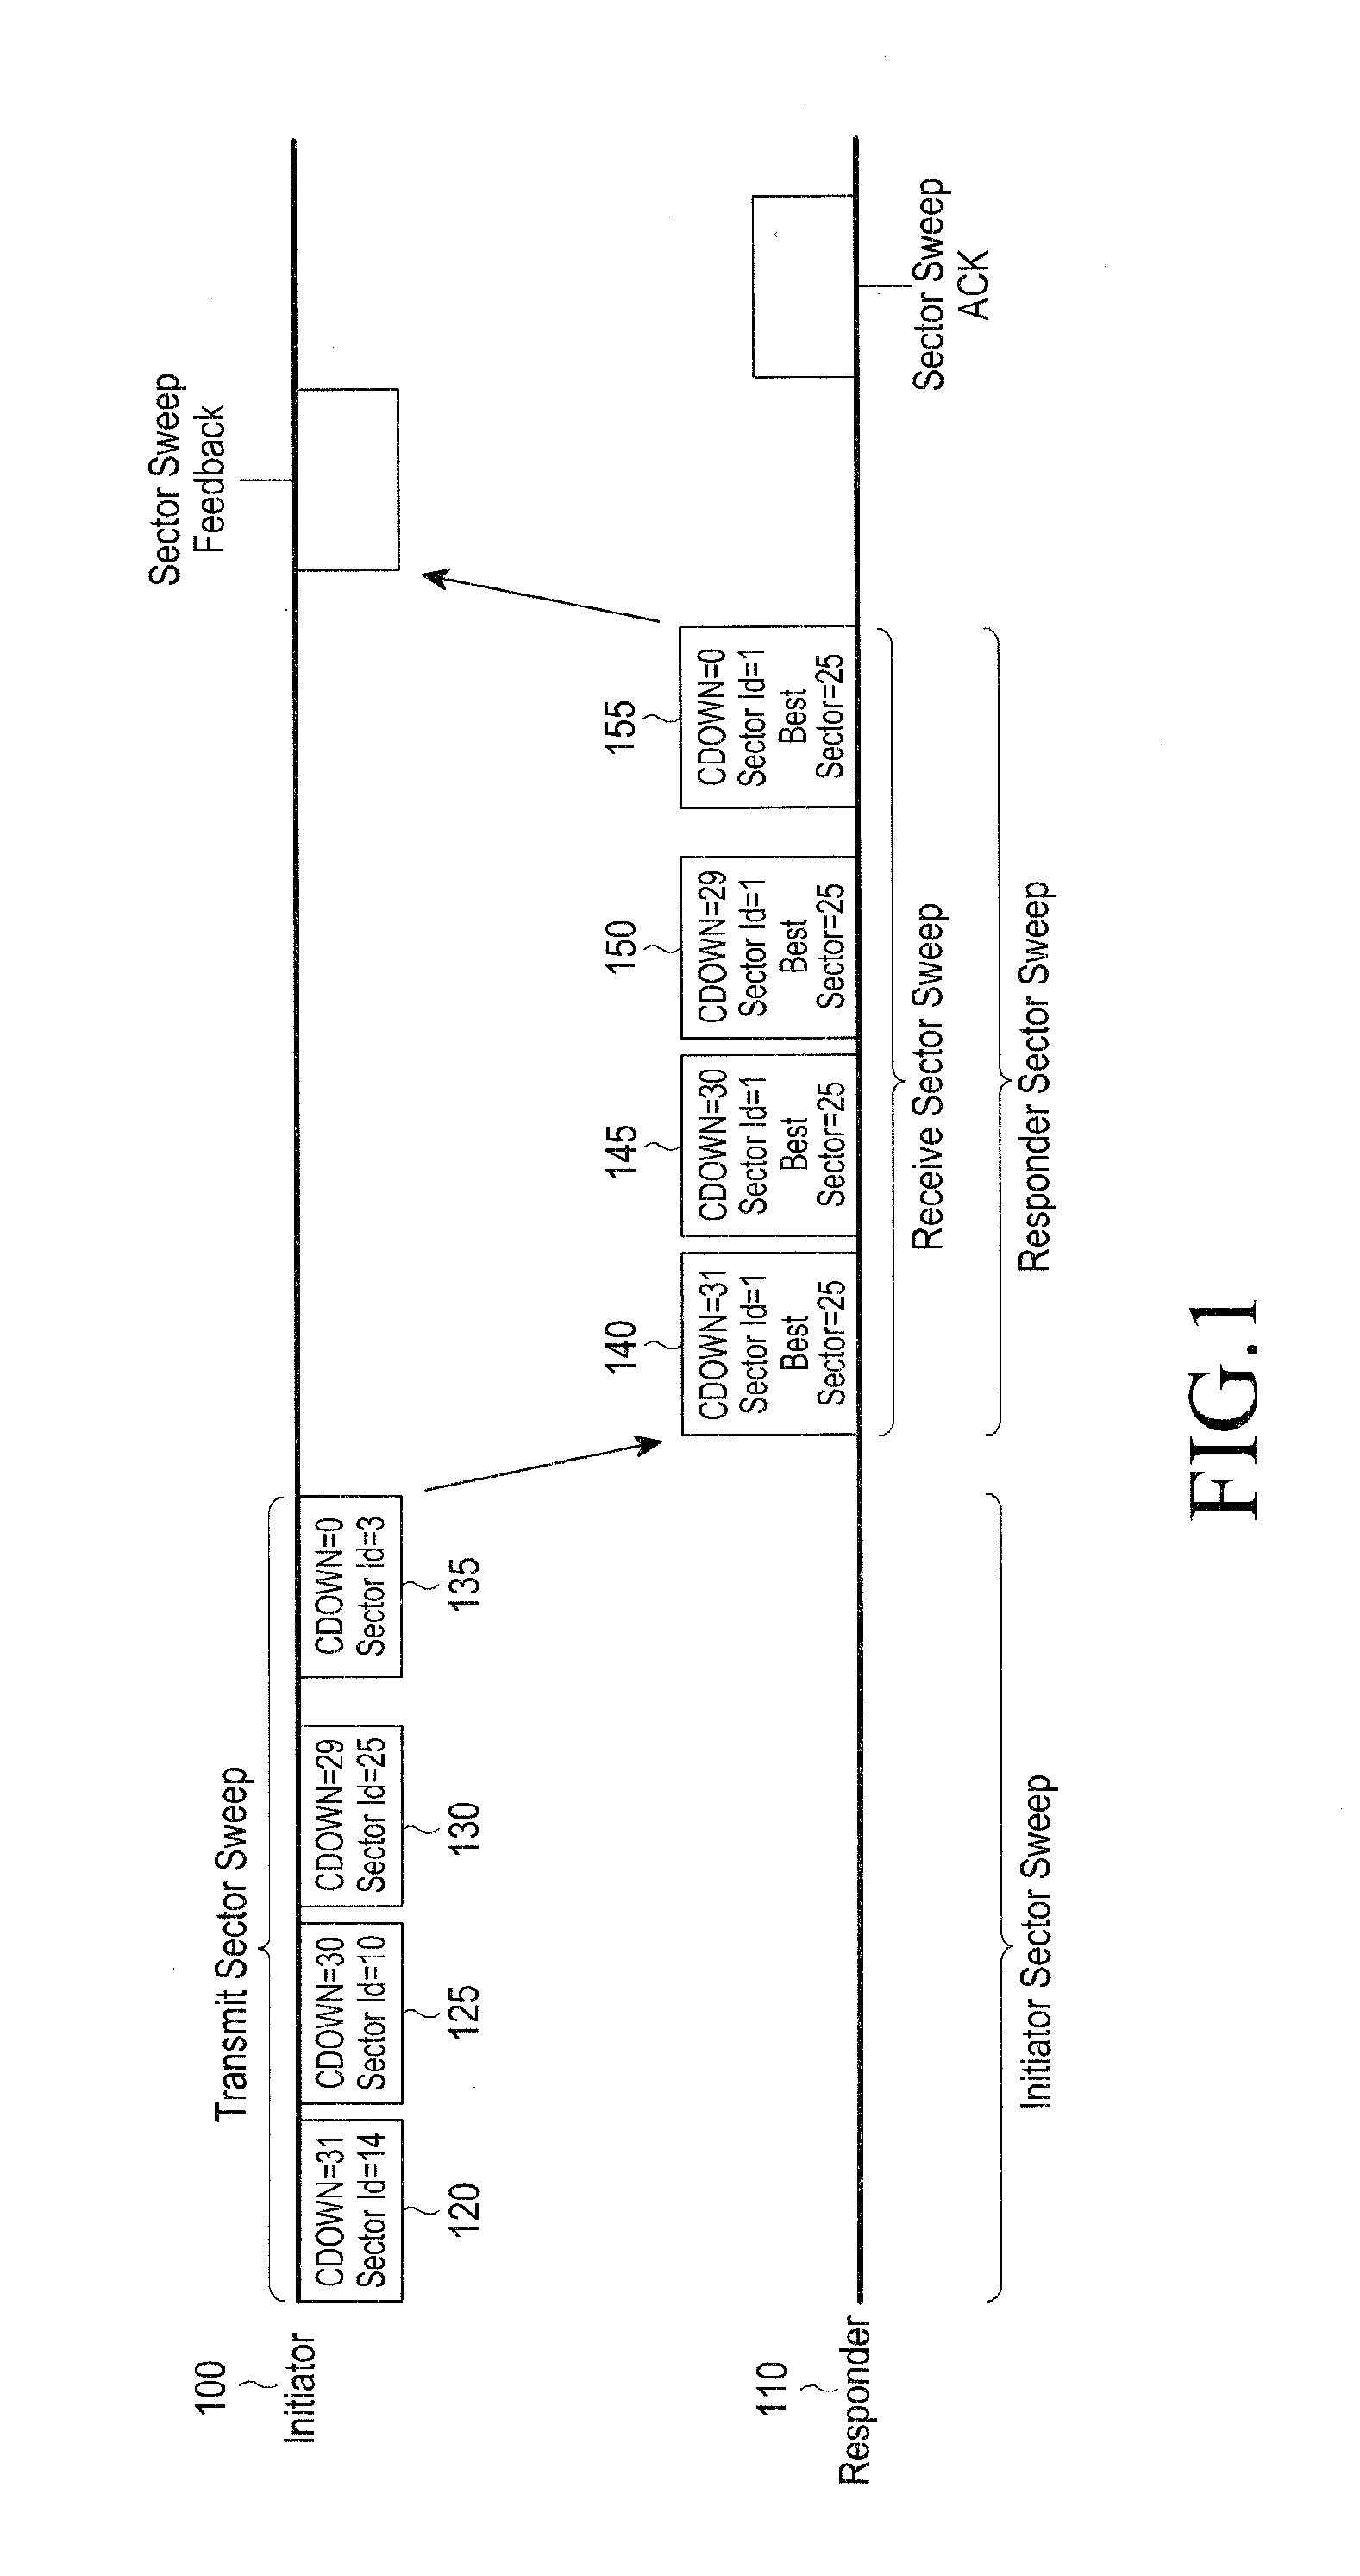 Scheme for performing beamforming in communication system